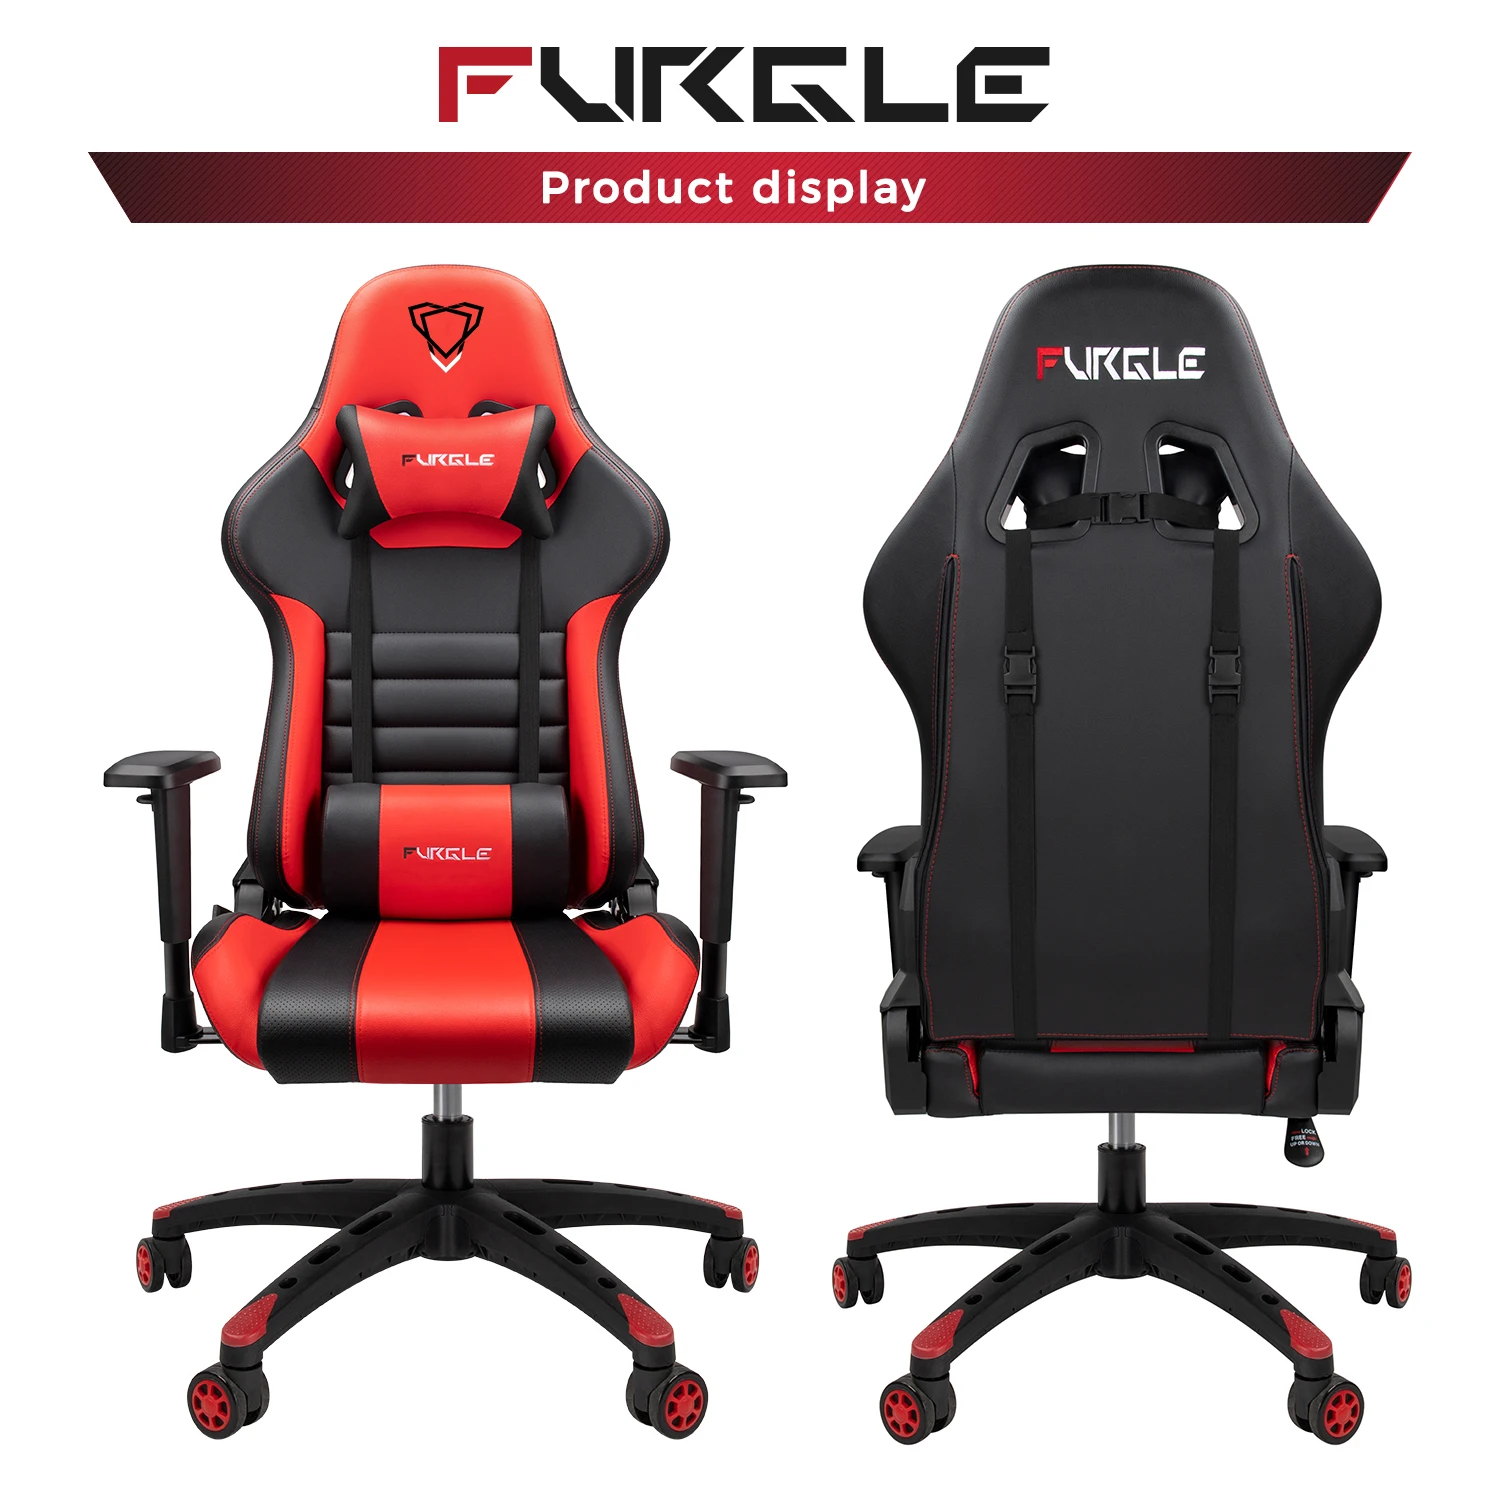 Furgle Gaming Chair White Computer Chair With Leather Boss Chair Office Chair Furniture Wcg Game Chairs Desk Chair Racing Chair